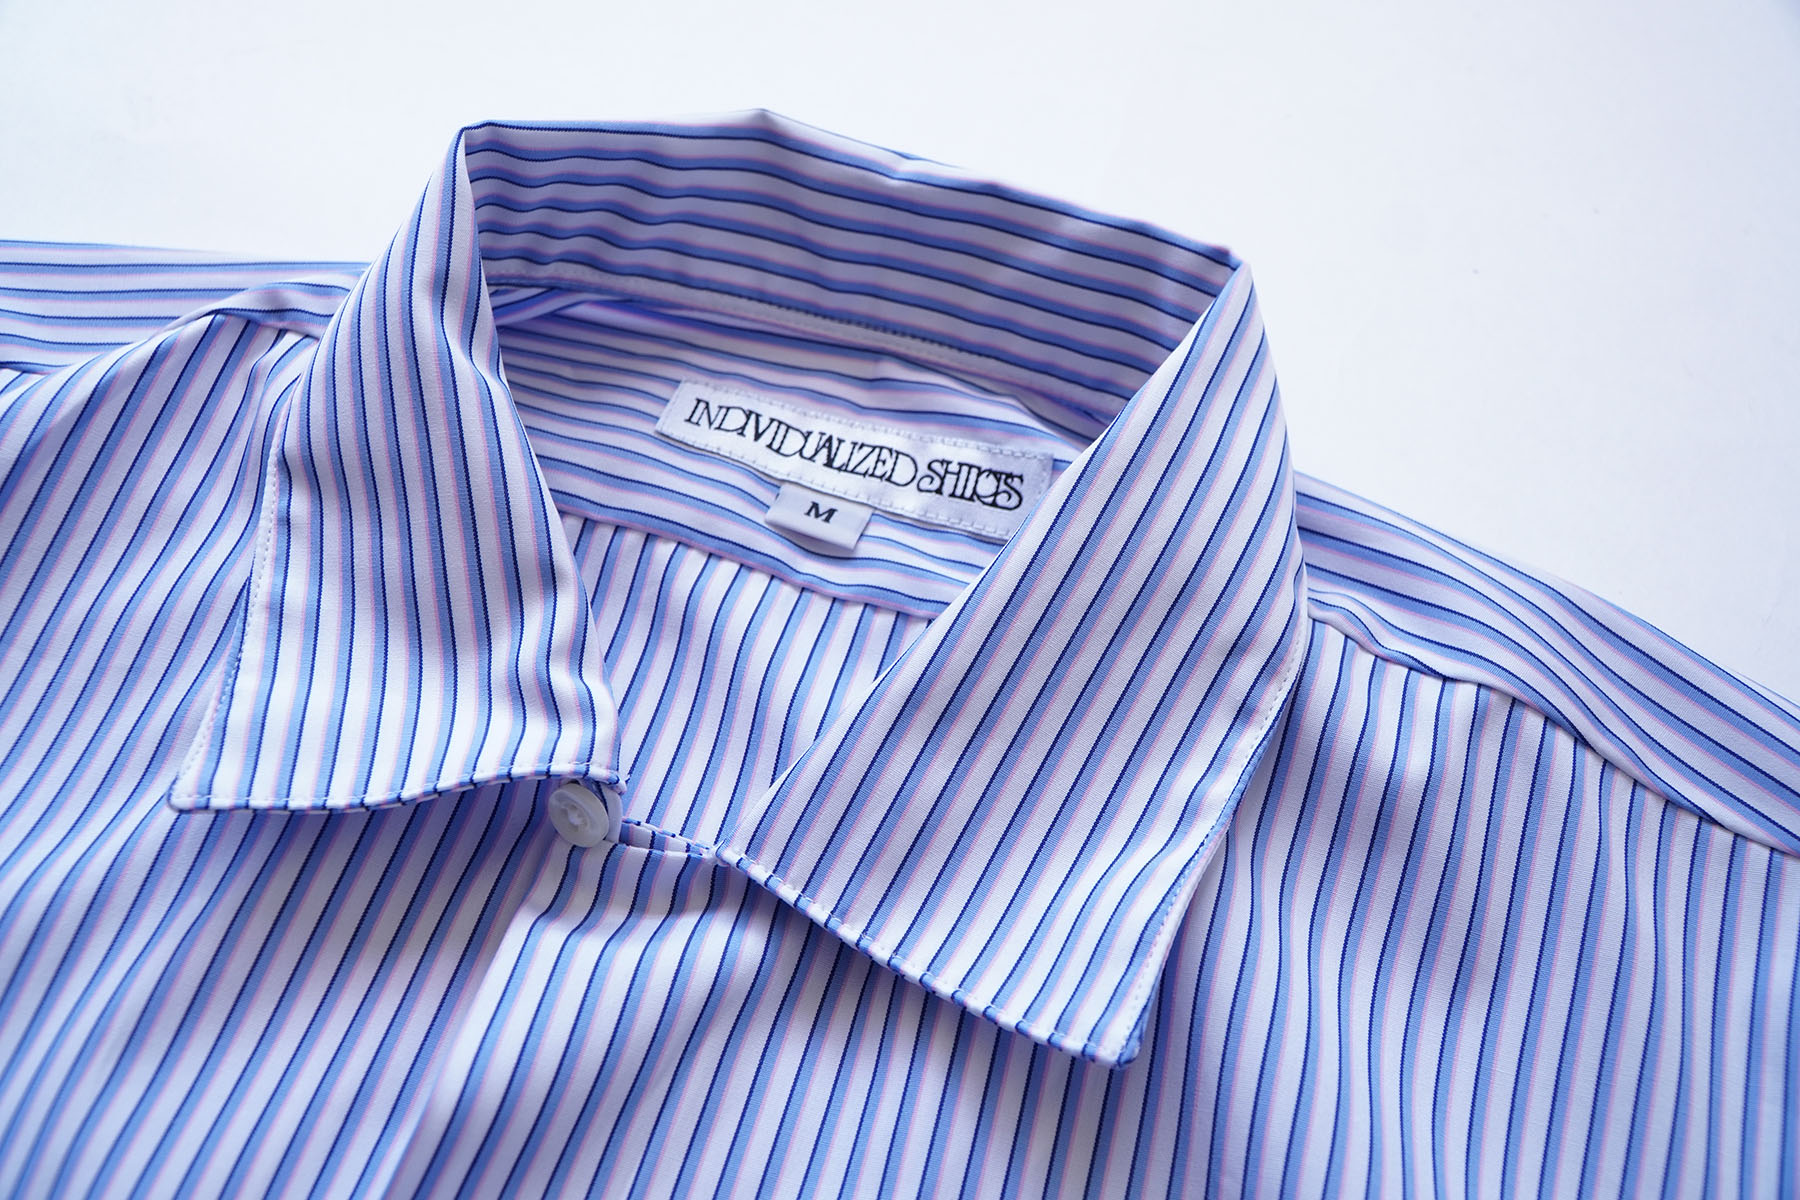 exclusive for tranescent -open collar shirts- [individualized shirts] top button